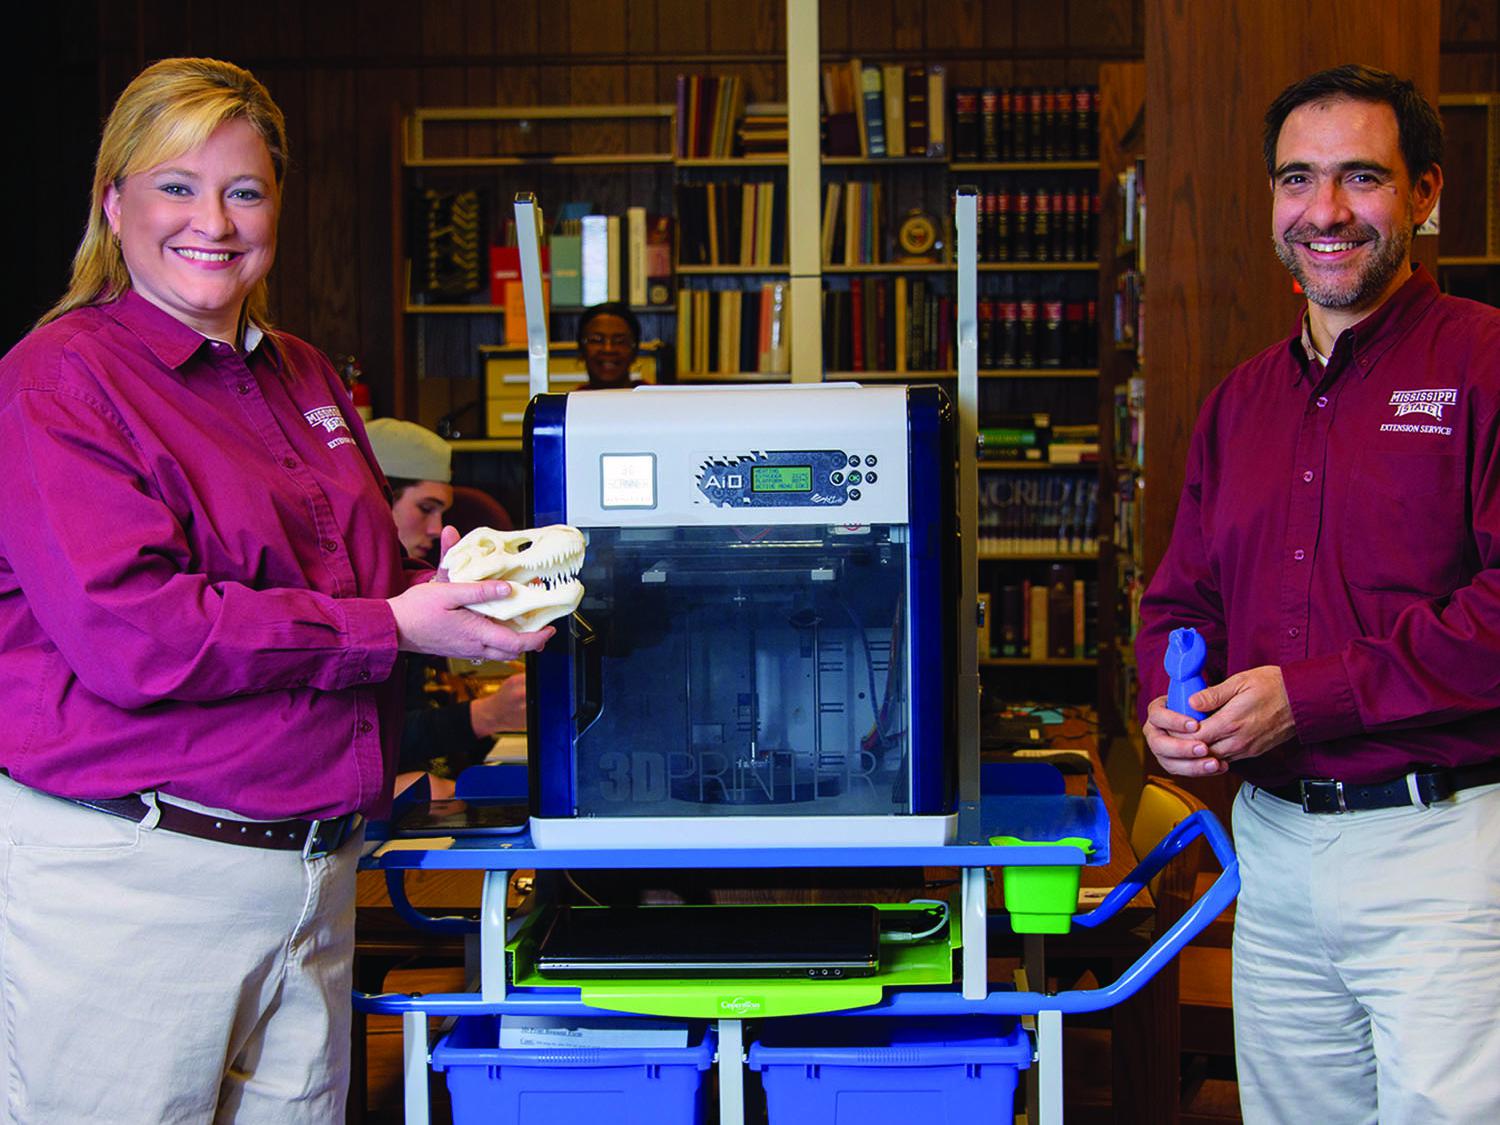 Christy King, Clarke County Extension agent, and Roberto Gallardo, an associate Extension professor in the Center for Technology Outreach, display items made with a new 3-D printer at the Quitman Public Library. (Photo by MSU Extension Service/Kevin Hudson)